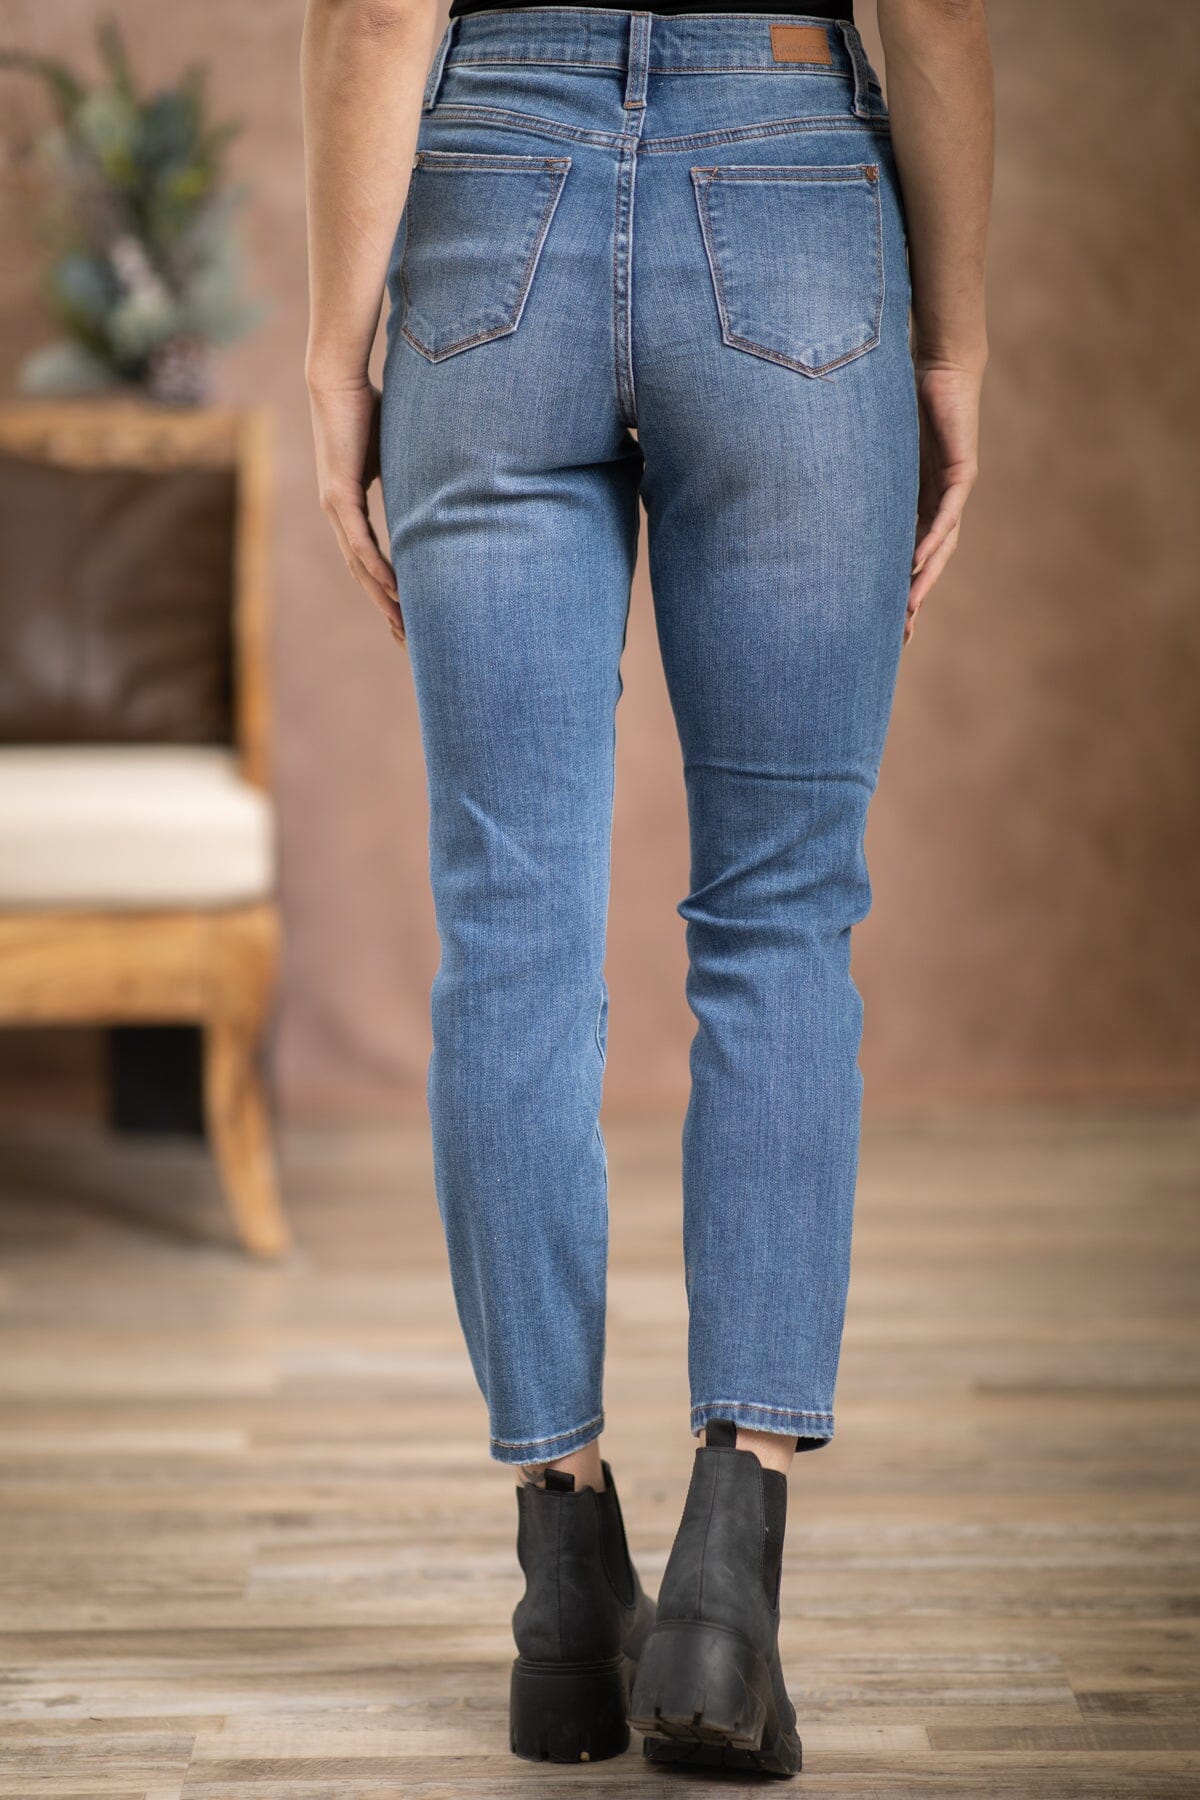 Judy Blue Medium Wash Slim Fit Jeans - Filly Flair